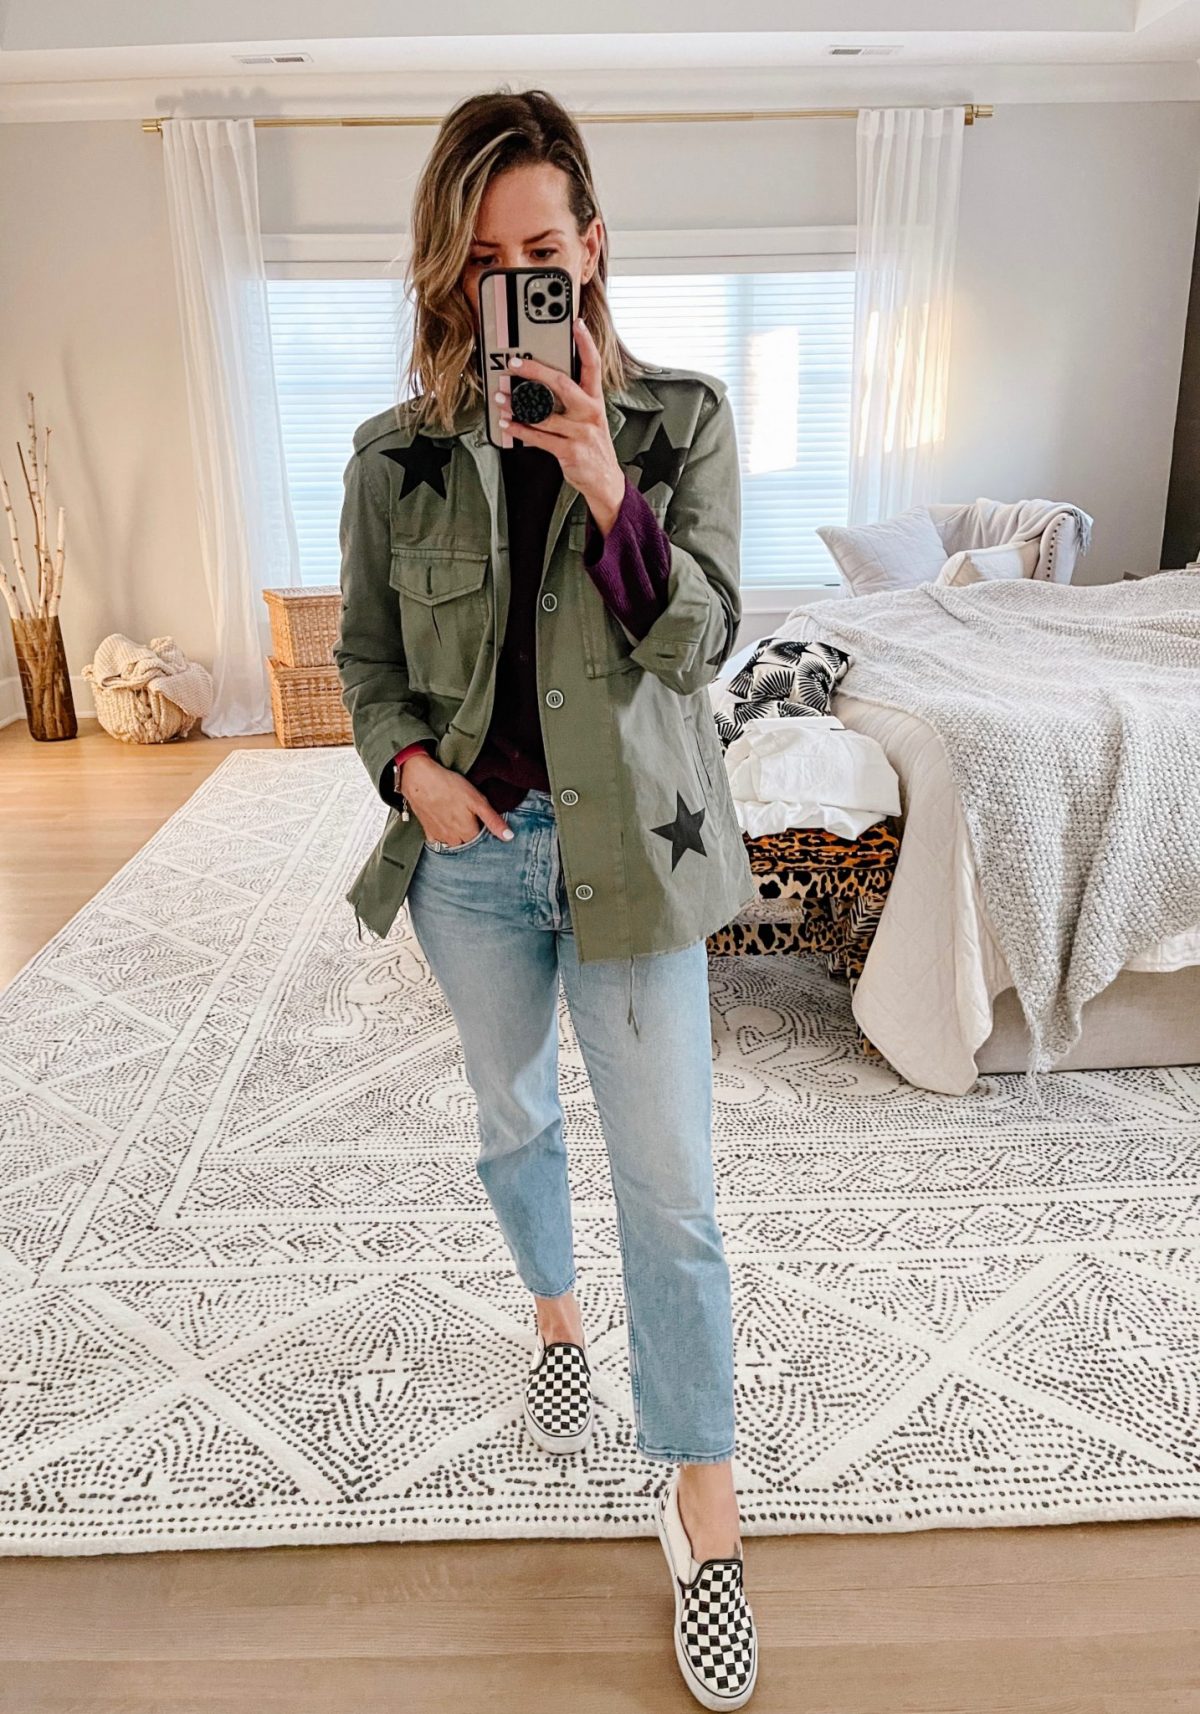 Suzanne wearing a star print jacket, denim, and Vans sneakers